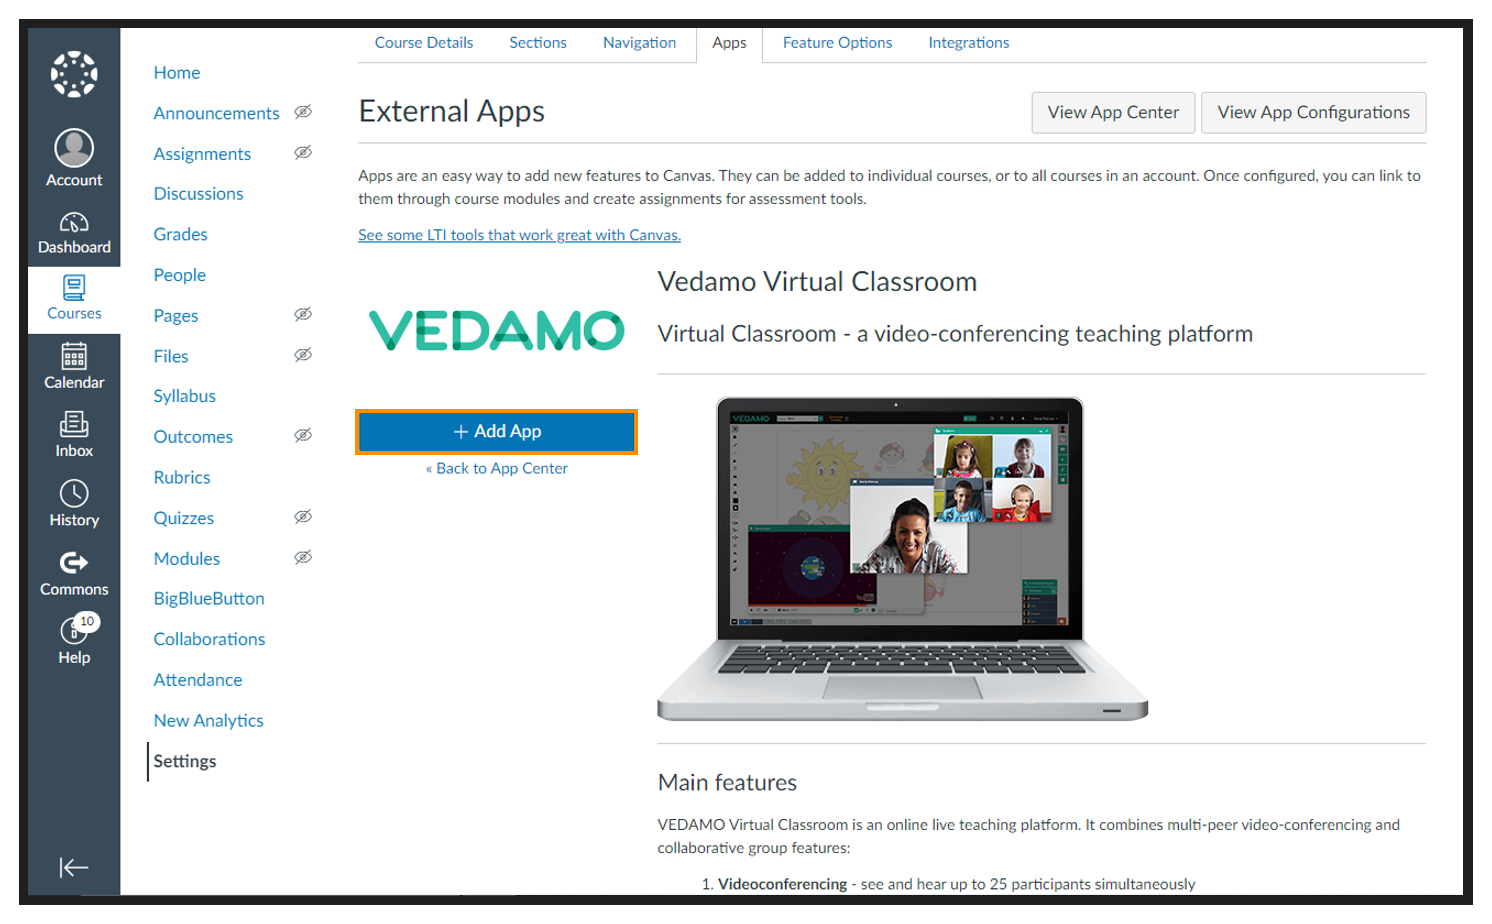 How to Integrate Vedamo Virtual Classroom with Open-Source Canvas LMS: You will have to press the "Add App" button